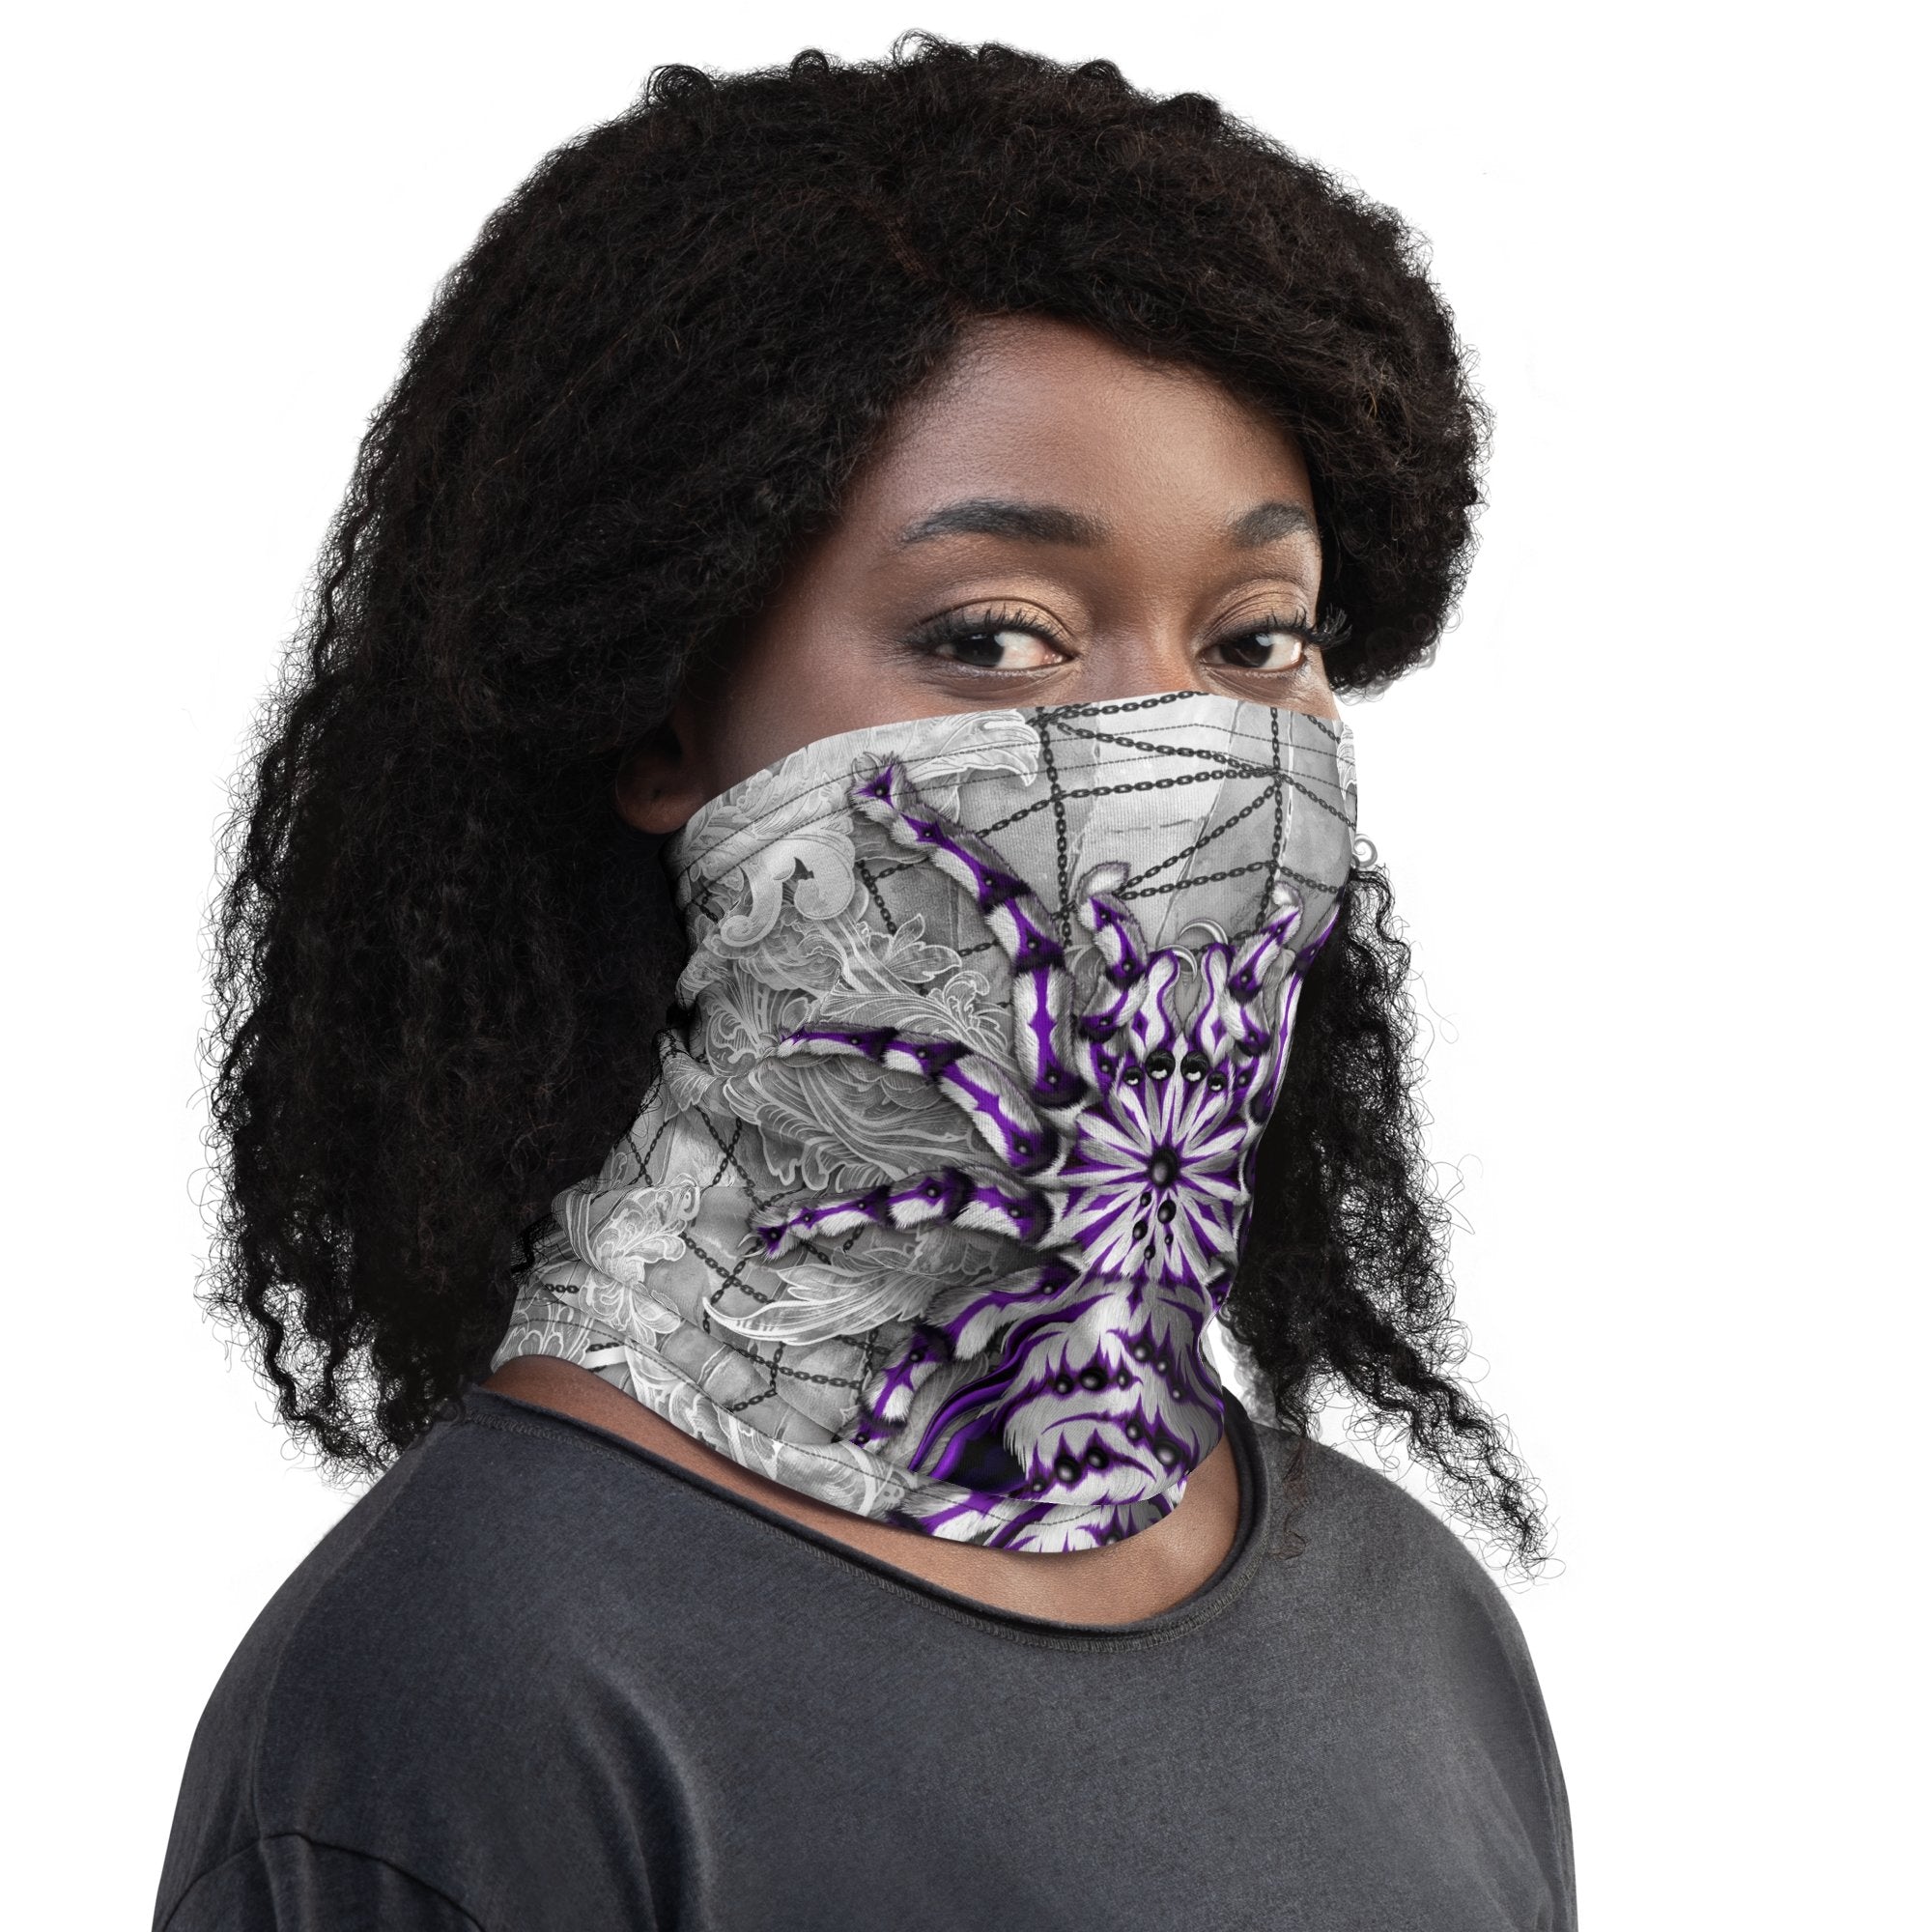 White Goth Neck Gaiter, Face Mask, Head Covering, Halloween Outfit, Tarantula Lover Gift - Spider, Stone, White and Purple - Abysm Internal